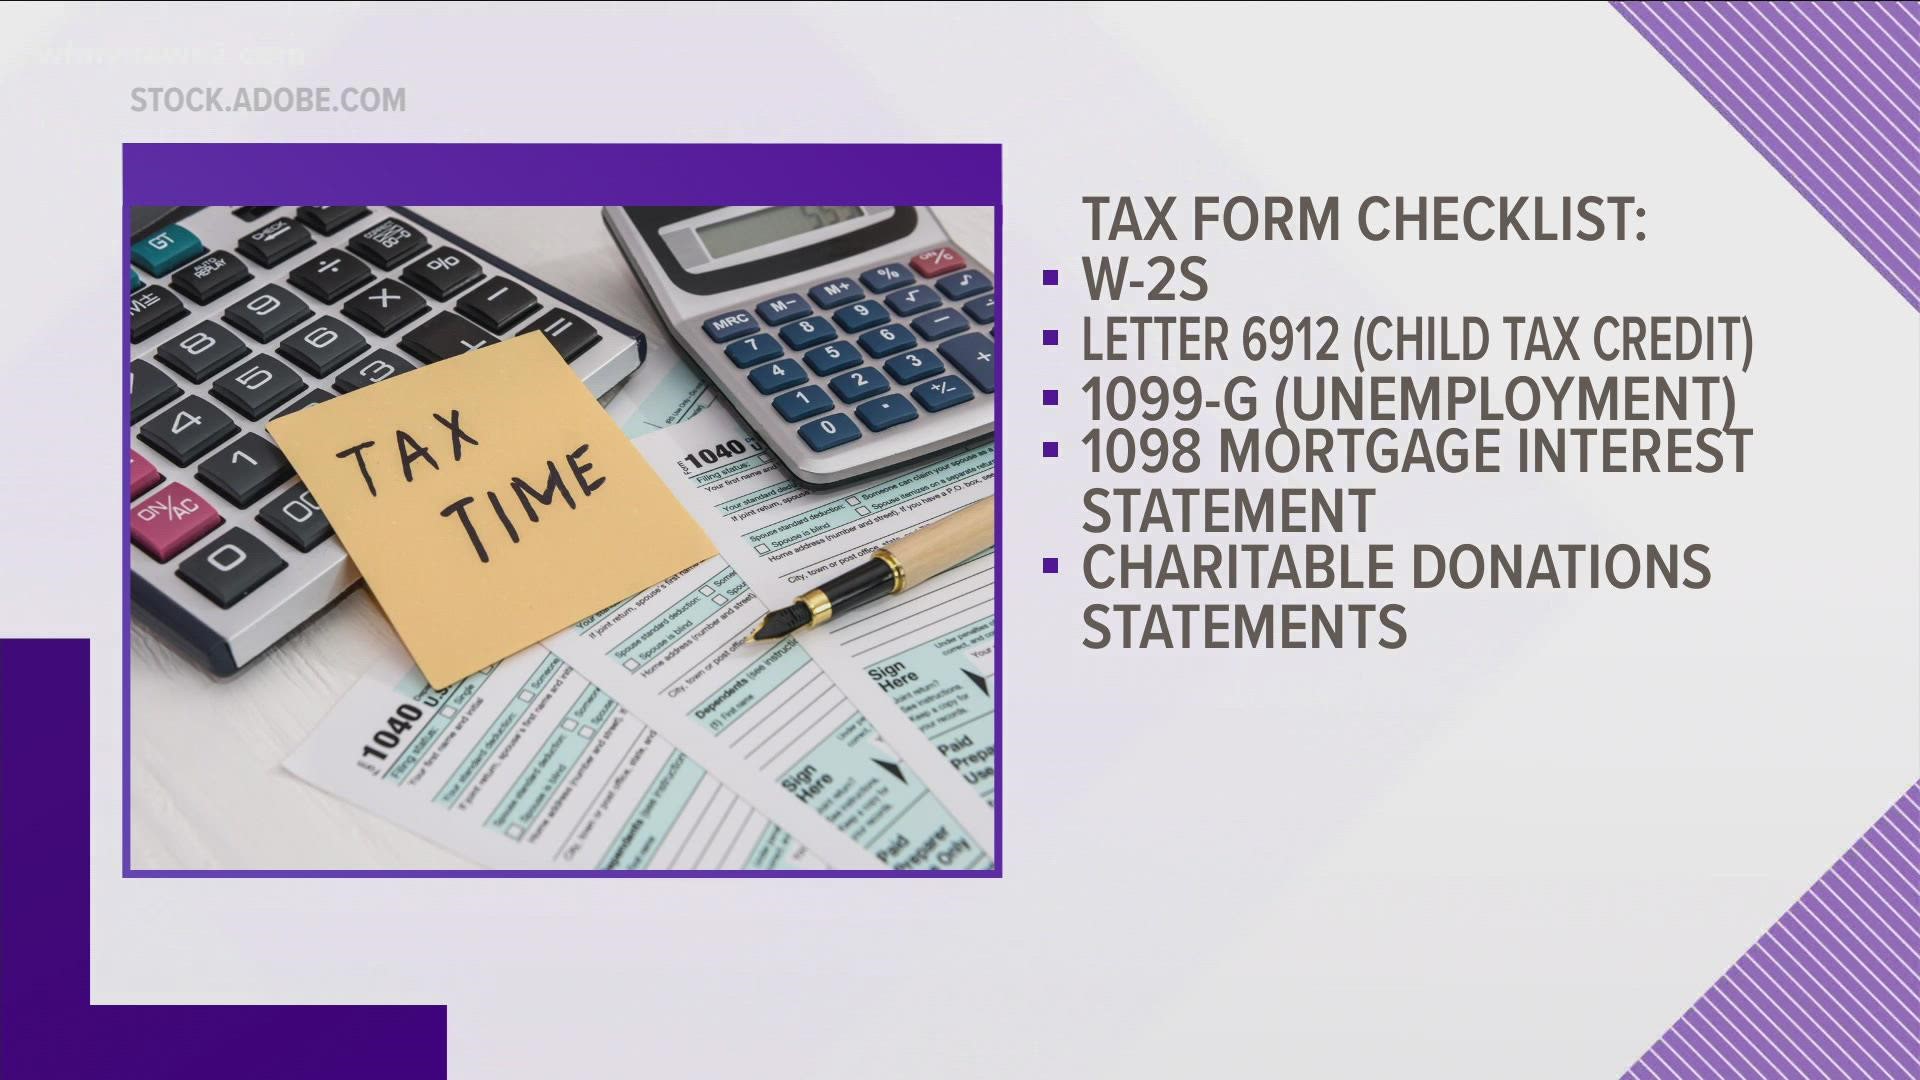 Between the Child Tax Credit and unemployment, filing taxes this year will be different for many.